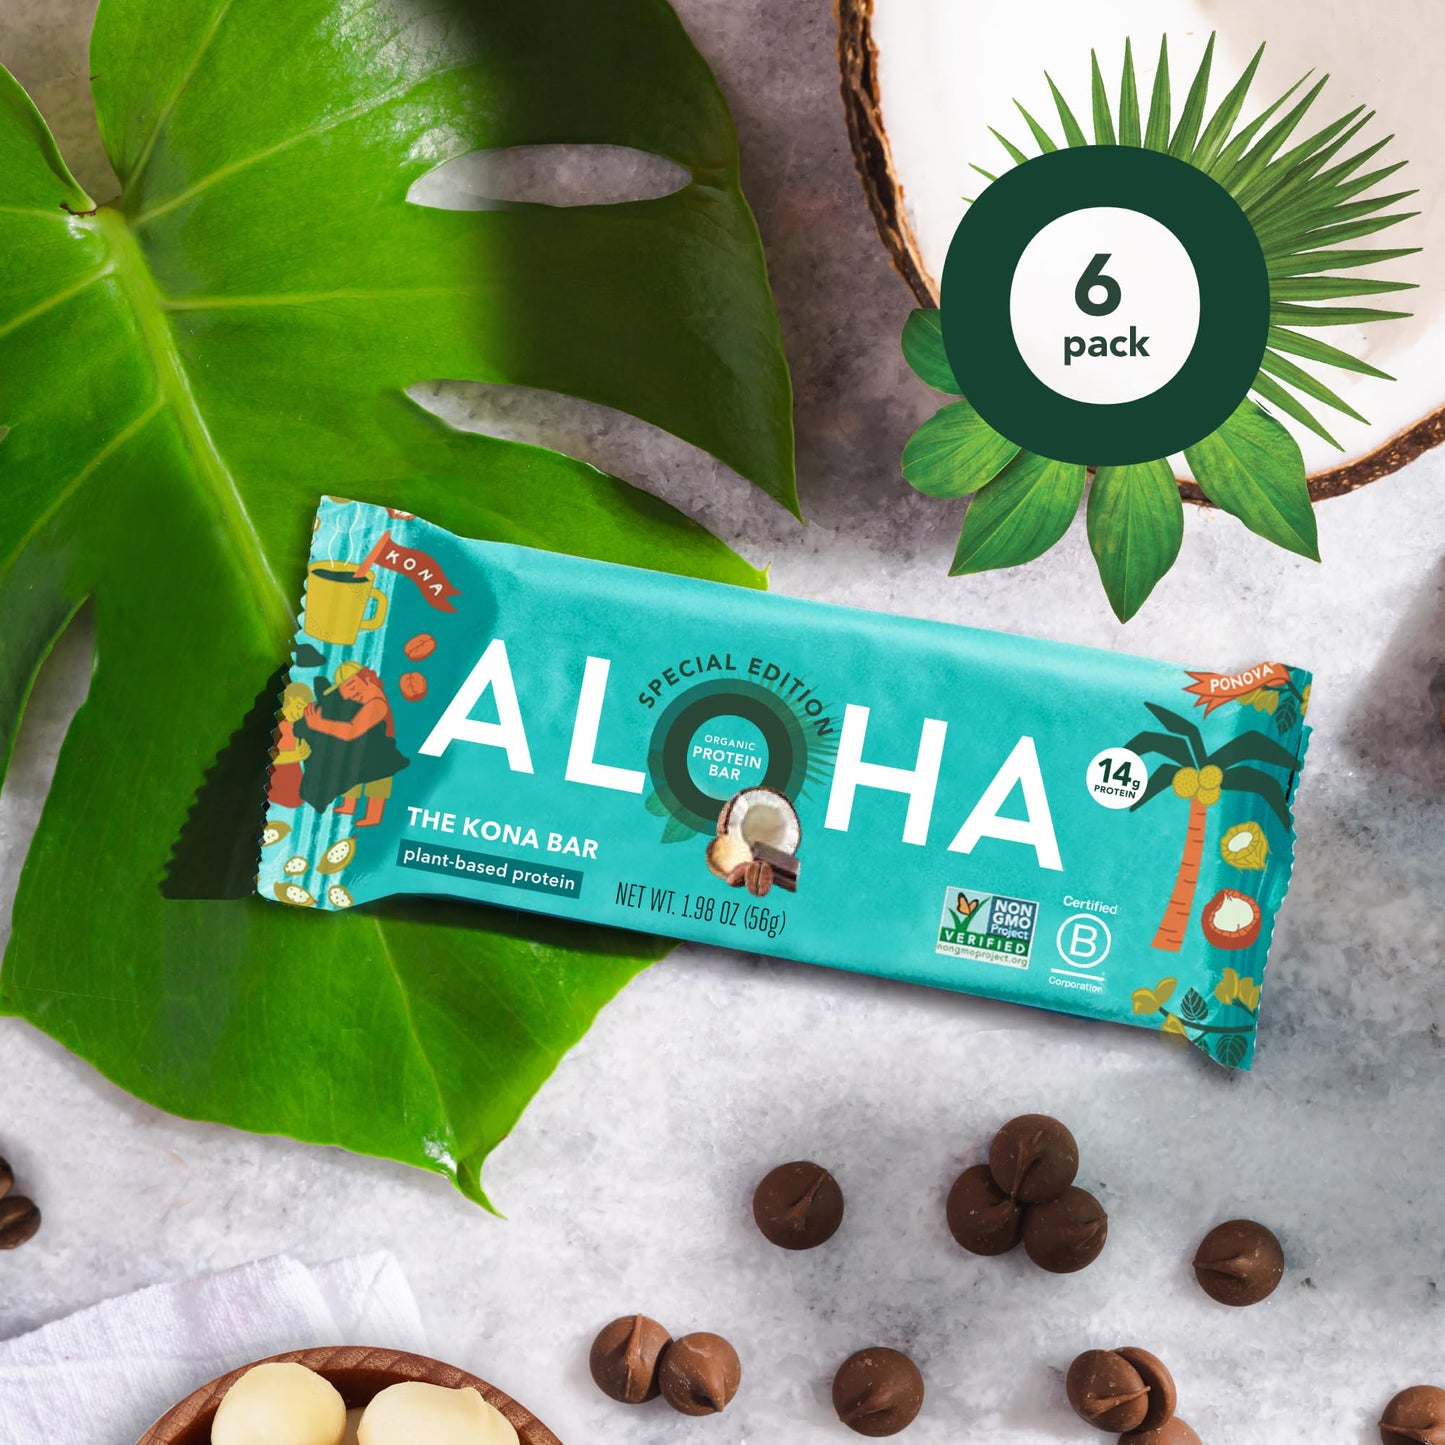 ALOHA Organic Plant Based Protein Bars |Peanut Butter Chocolate Chip | 1.98 Oz (Pack of 12) | Vegan, Low Sugar, Gluten Free, Paleo, Low Carb, Non-GMO, Stevia Free, Soy Free, No Sugar Alcohols